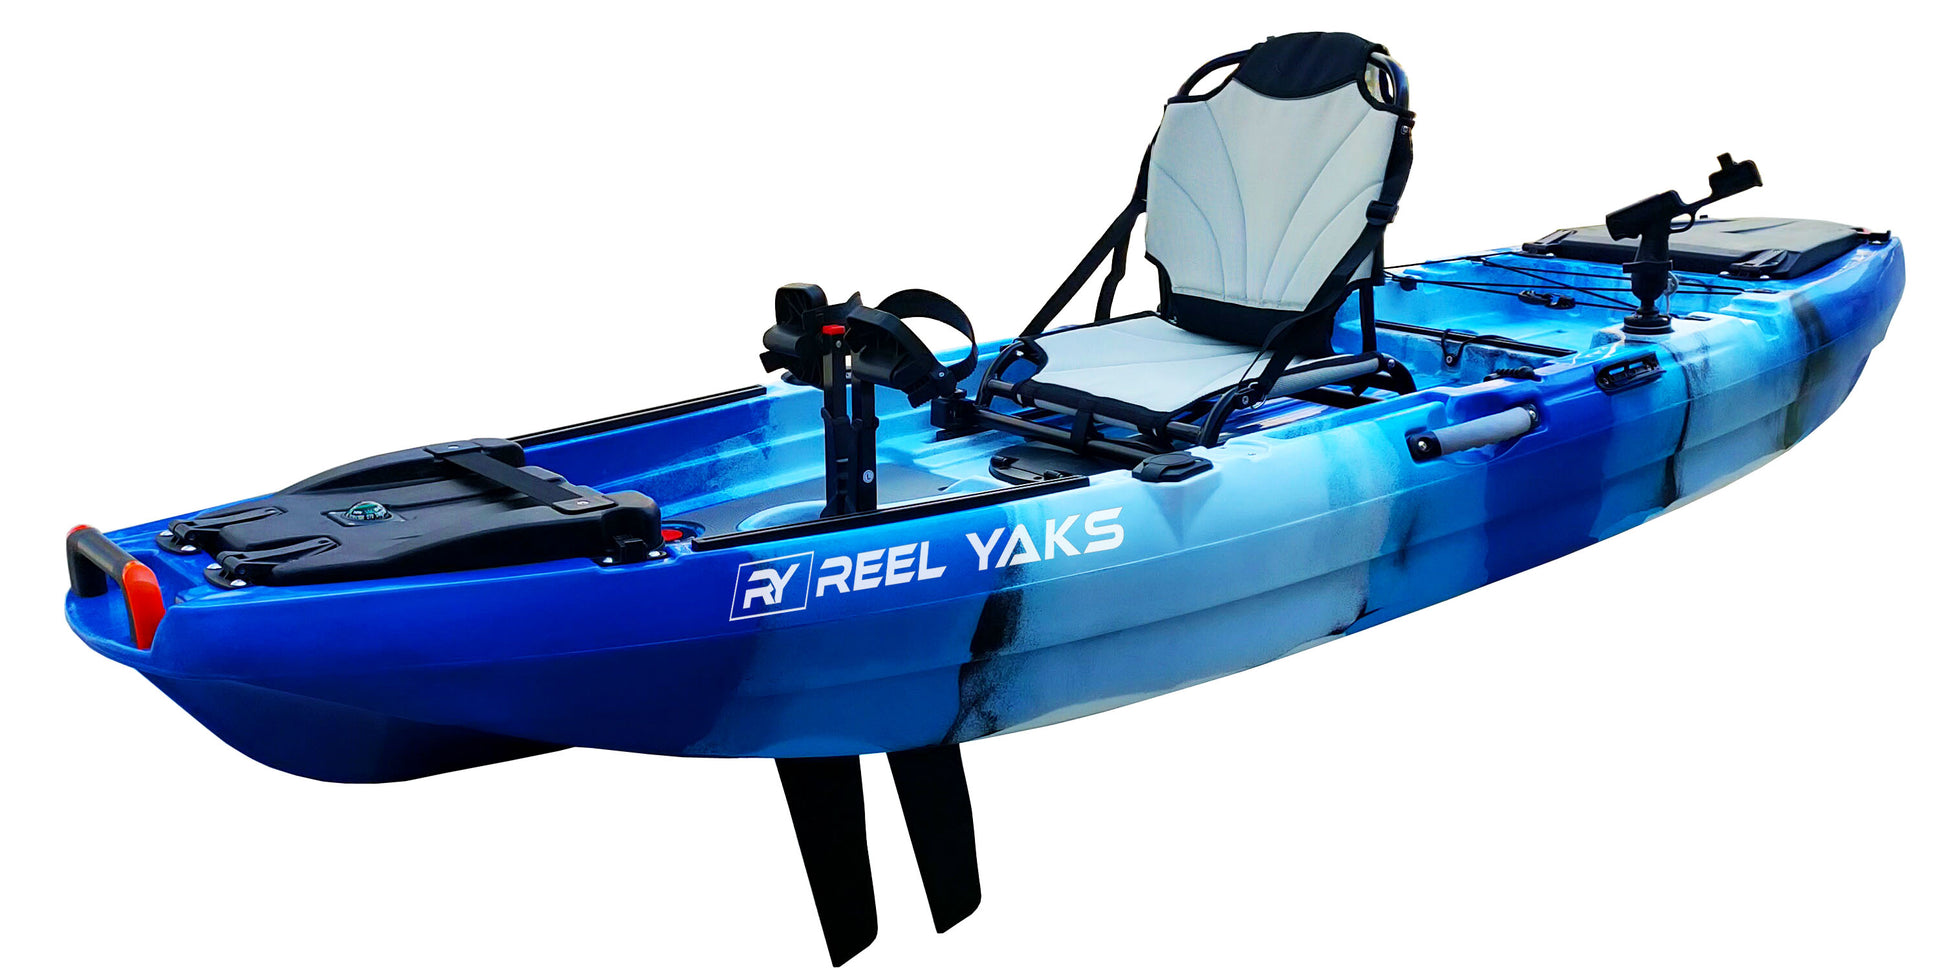 10' Reach Fin Drive Fishing Kayak | Adults youths kids | Standing sit on top